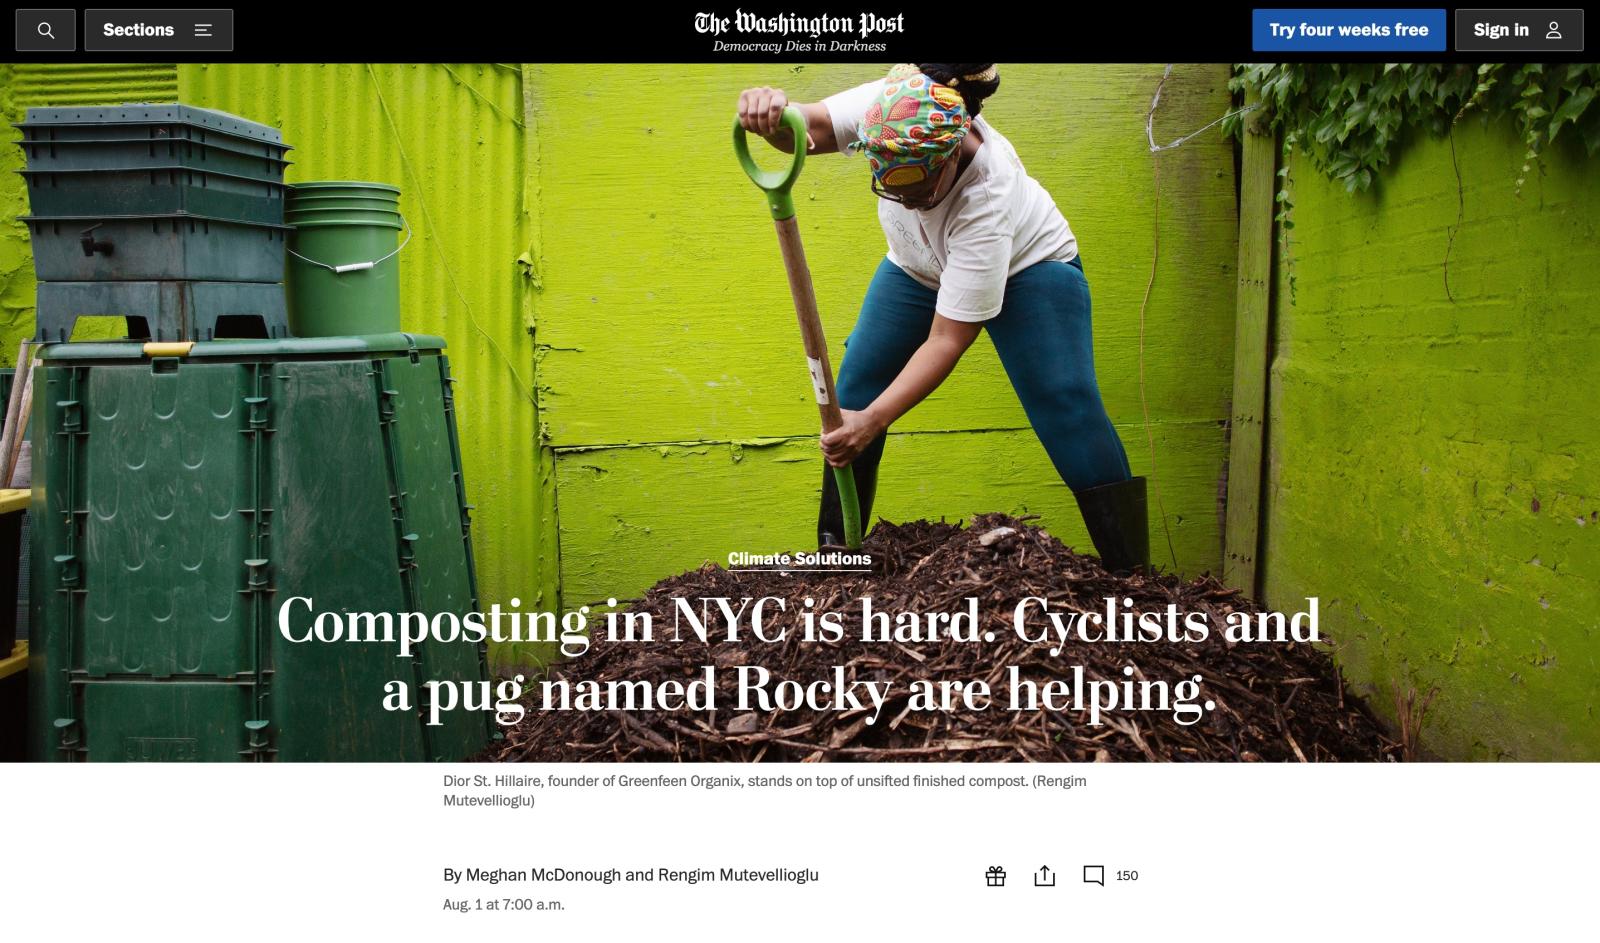 In The Washington Post: "Composting in NYC is hard. Cyclists and a pug named Rocky are helping" with Meghan McDonough 